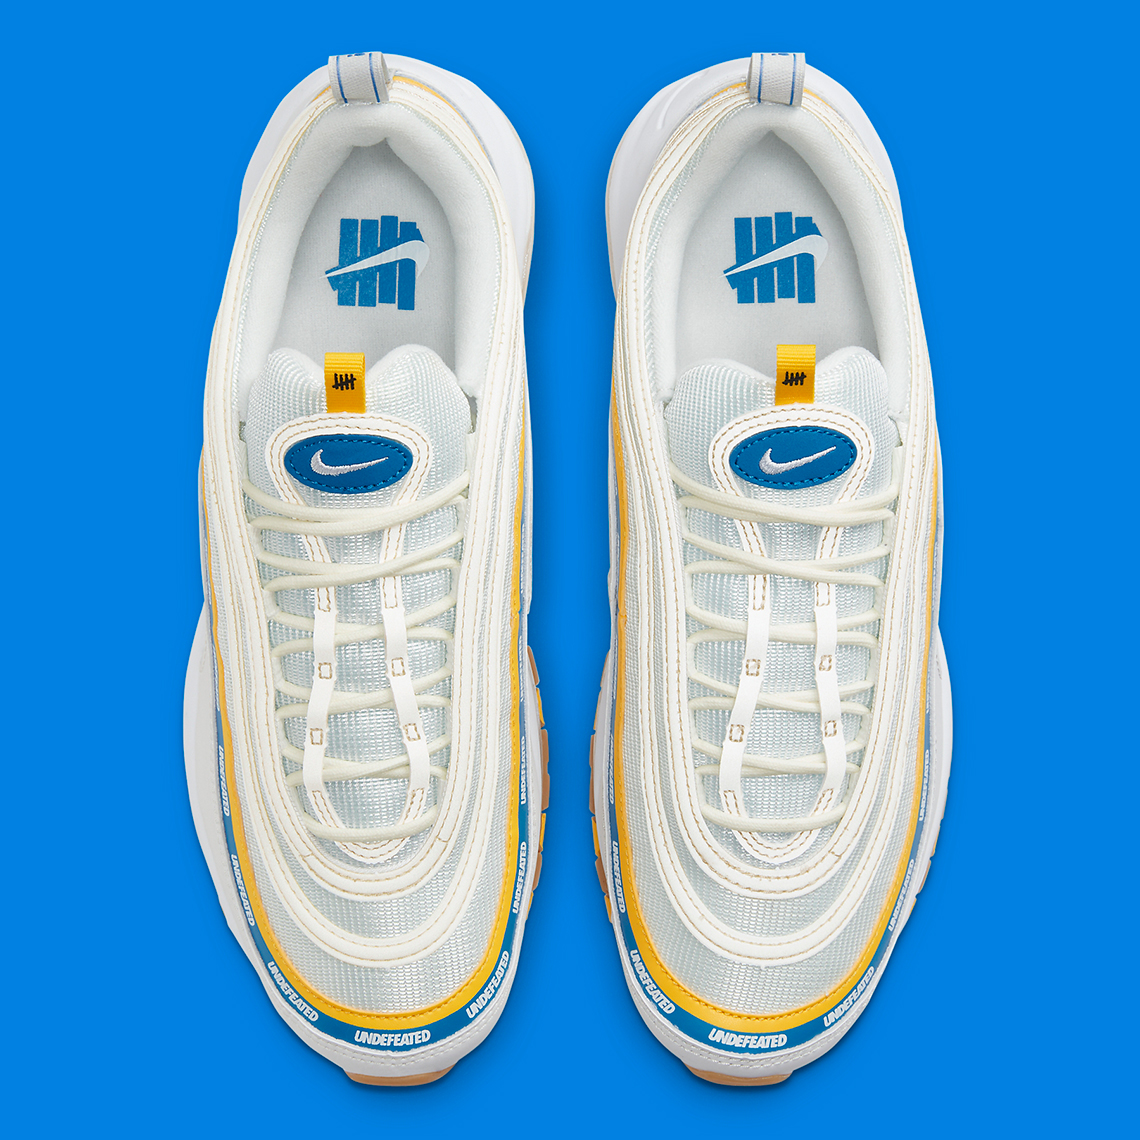 undefeated x nike air max 97 ucla